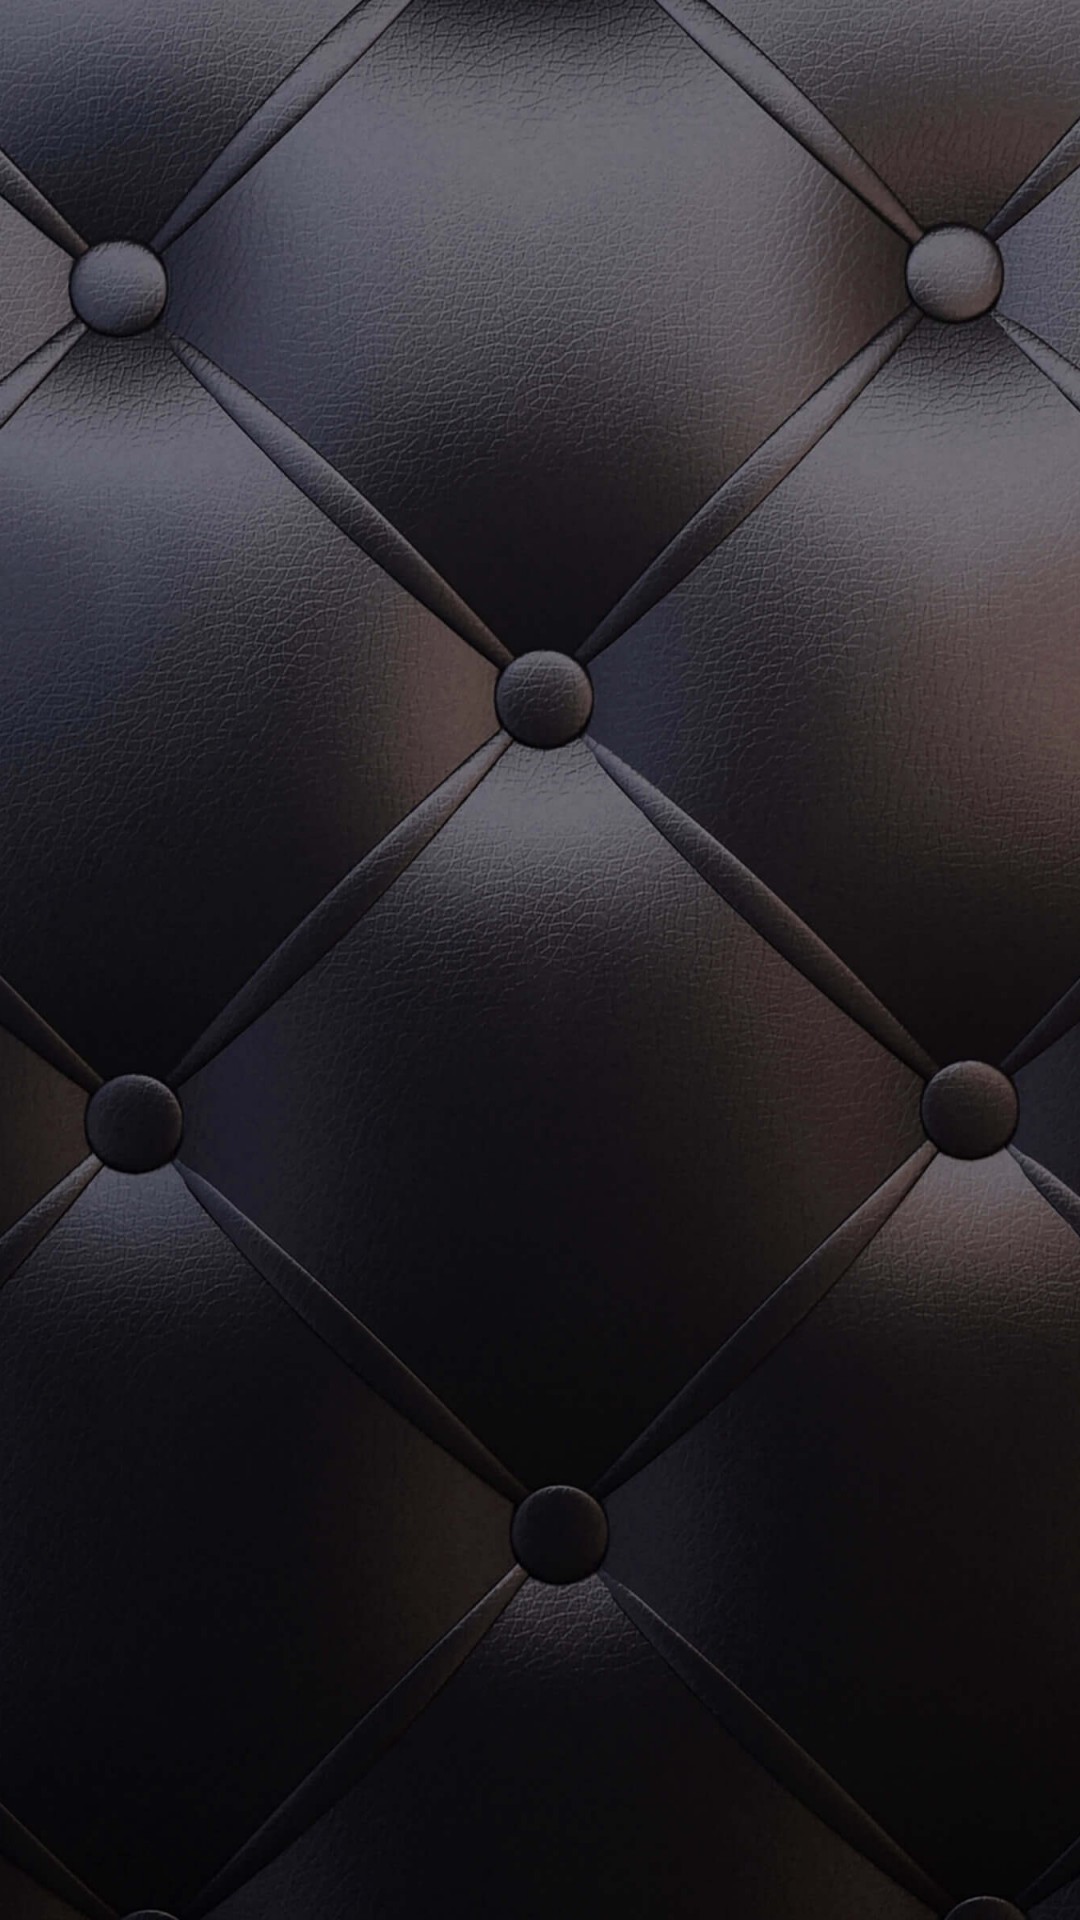 1080x1920 Black Leather Vintage Sofa HD wallpaper for Galaxy S5 HDwallpapers 